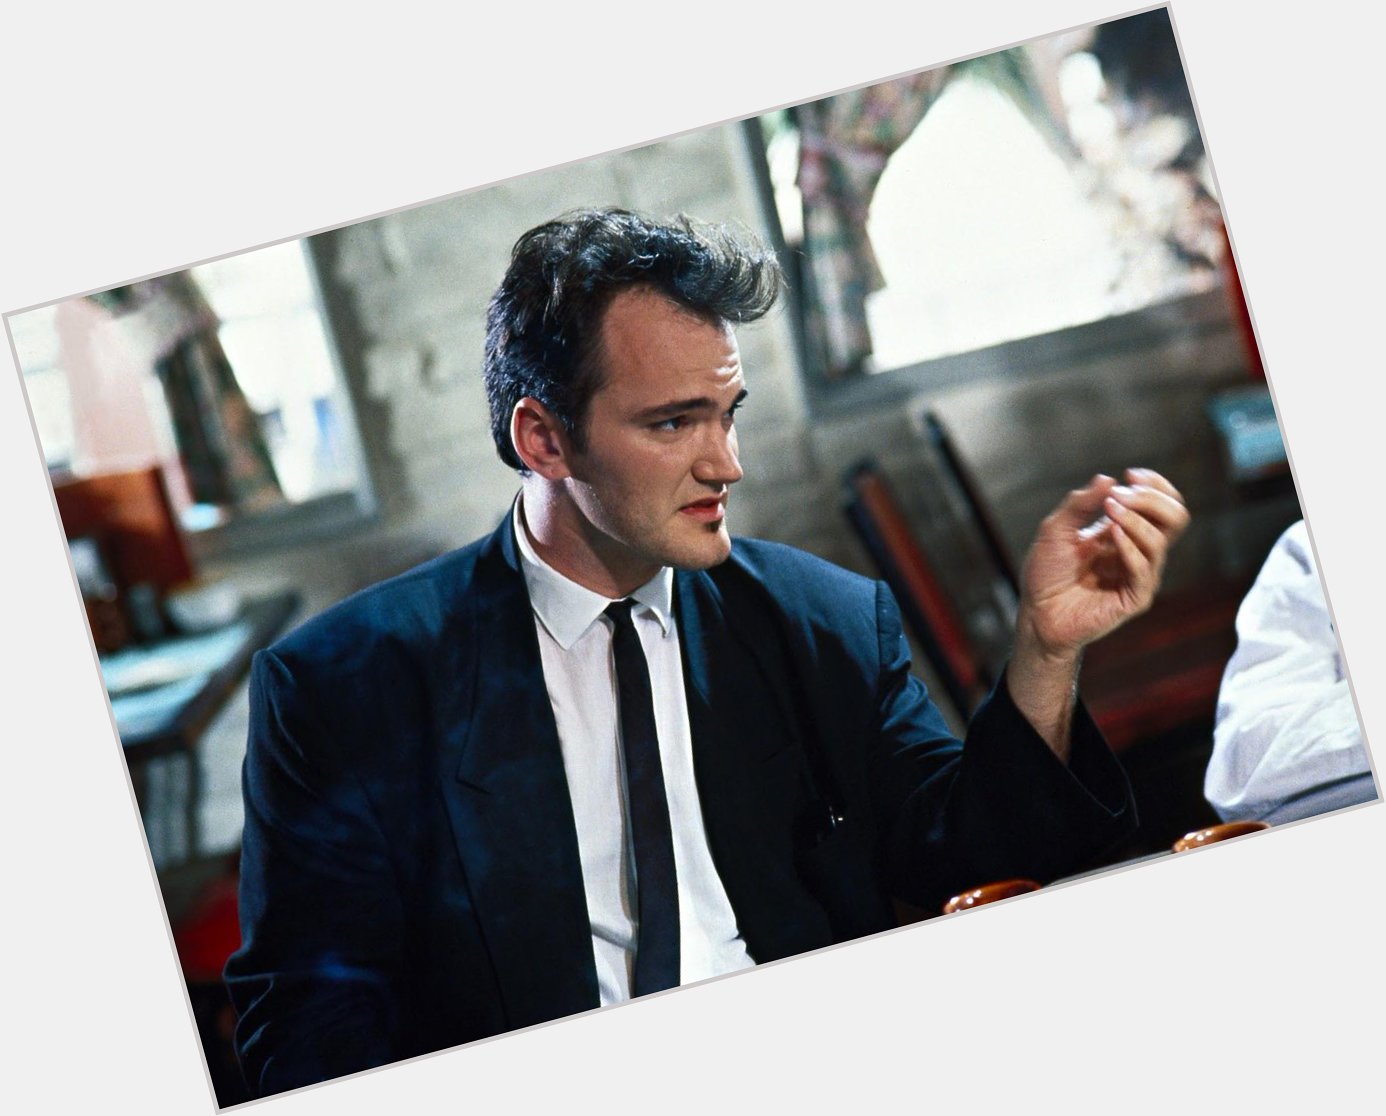 A very happy birthday to legendary film director, producer, and actor Quentin Tarantino! What are your fav QT films? 